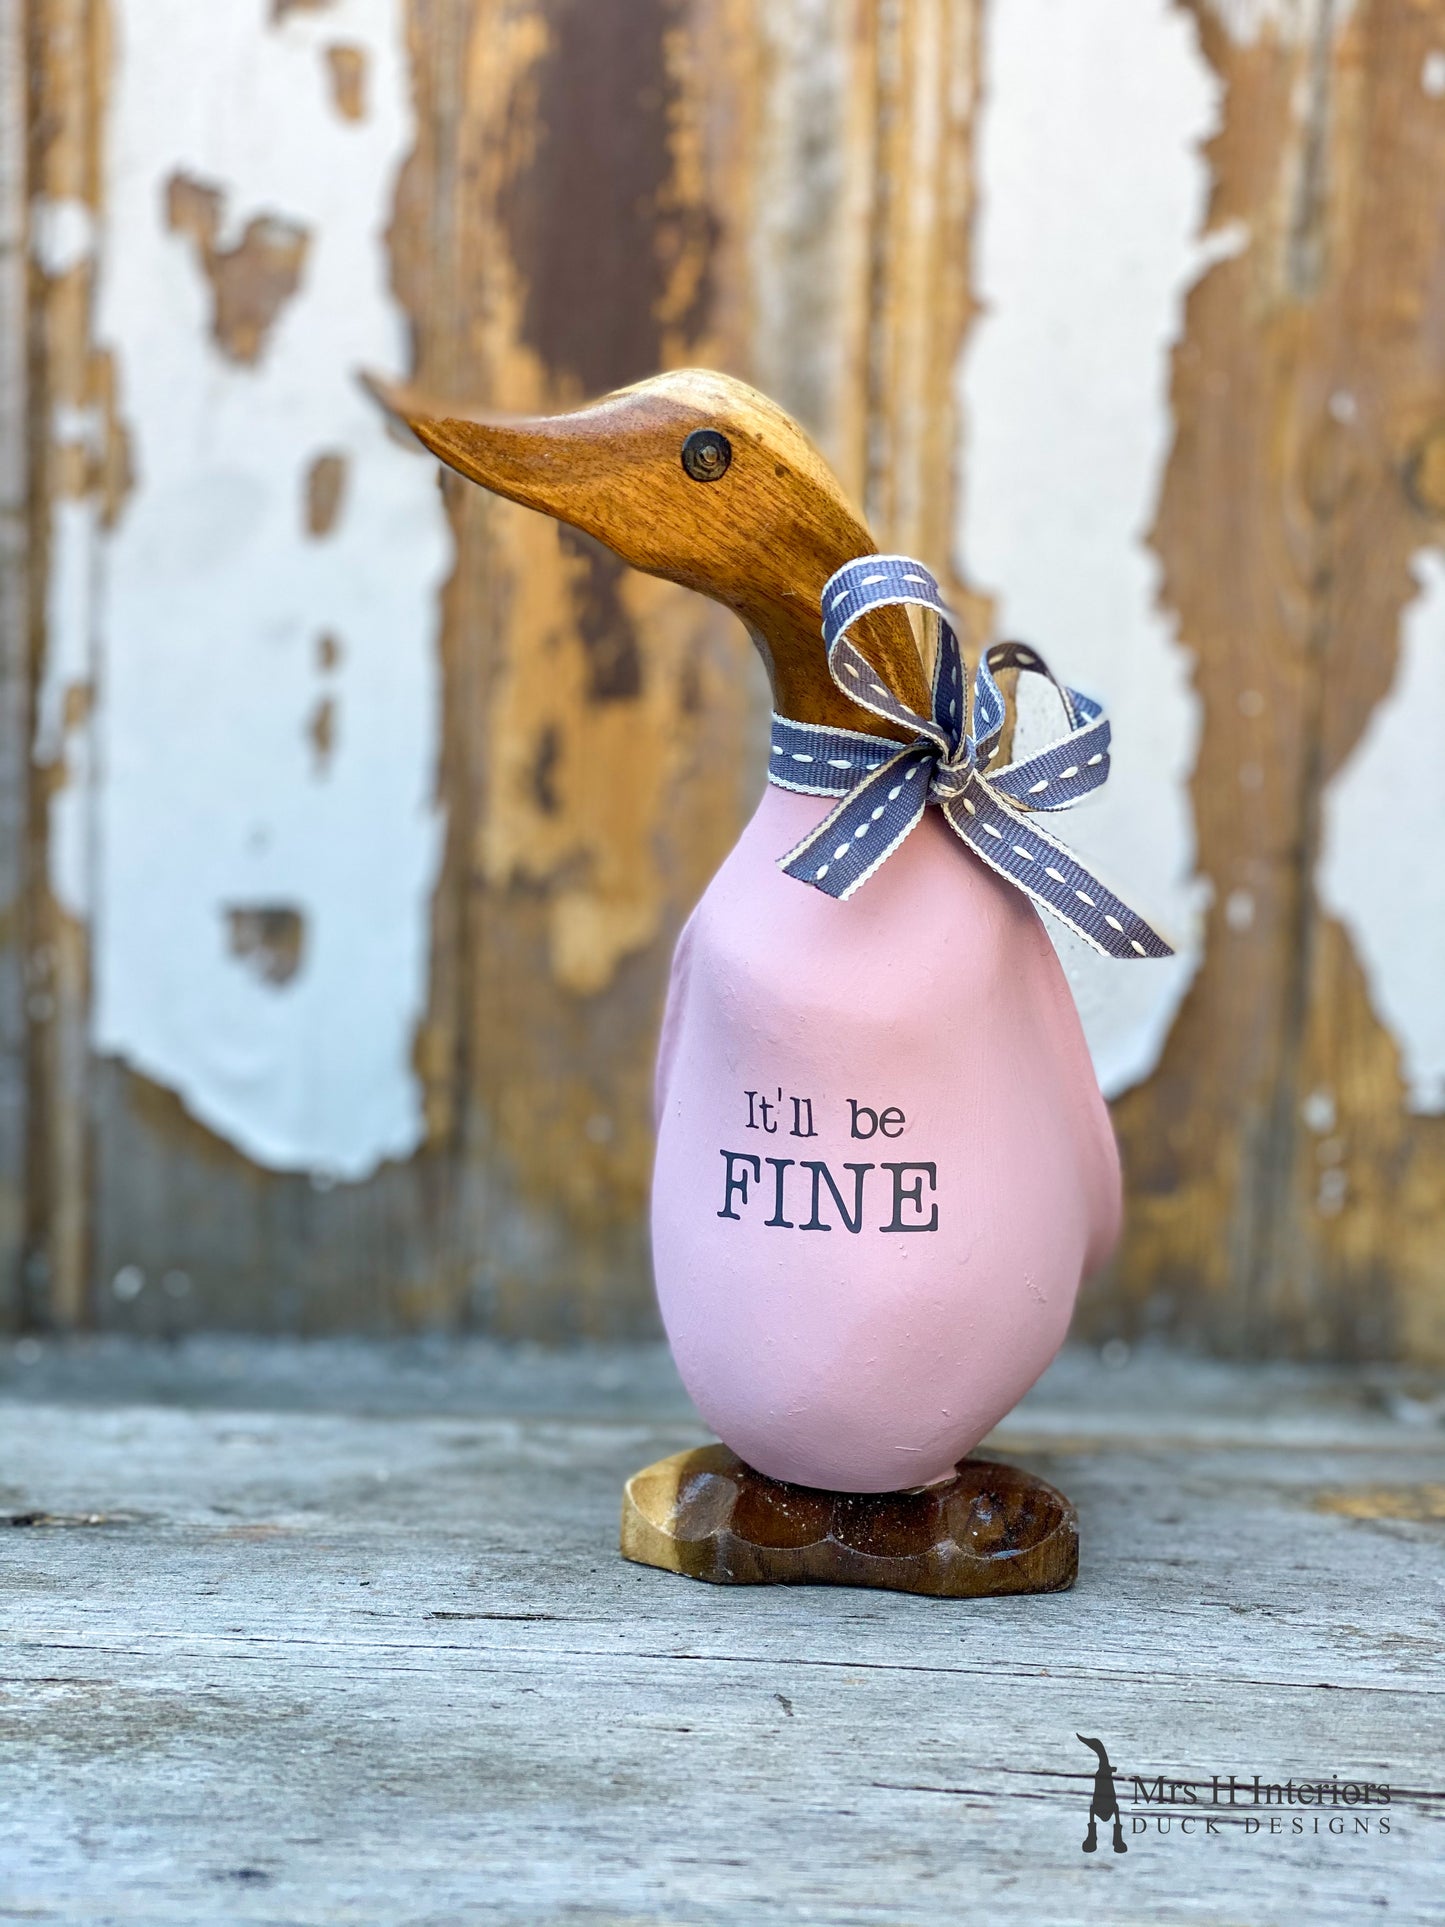 It’ll be fine - Decorated Wooden Duck in Boots by Mrs H the Duck Lady